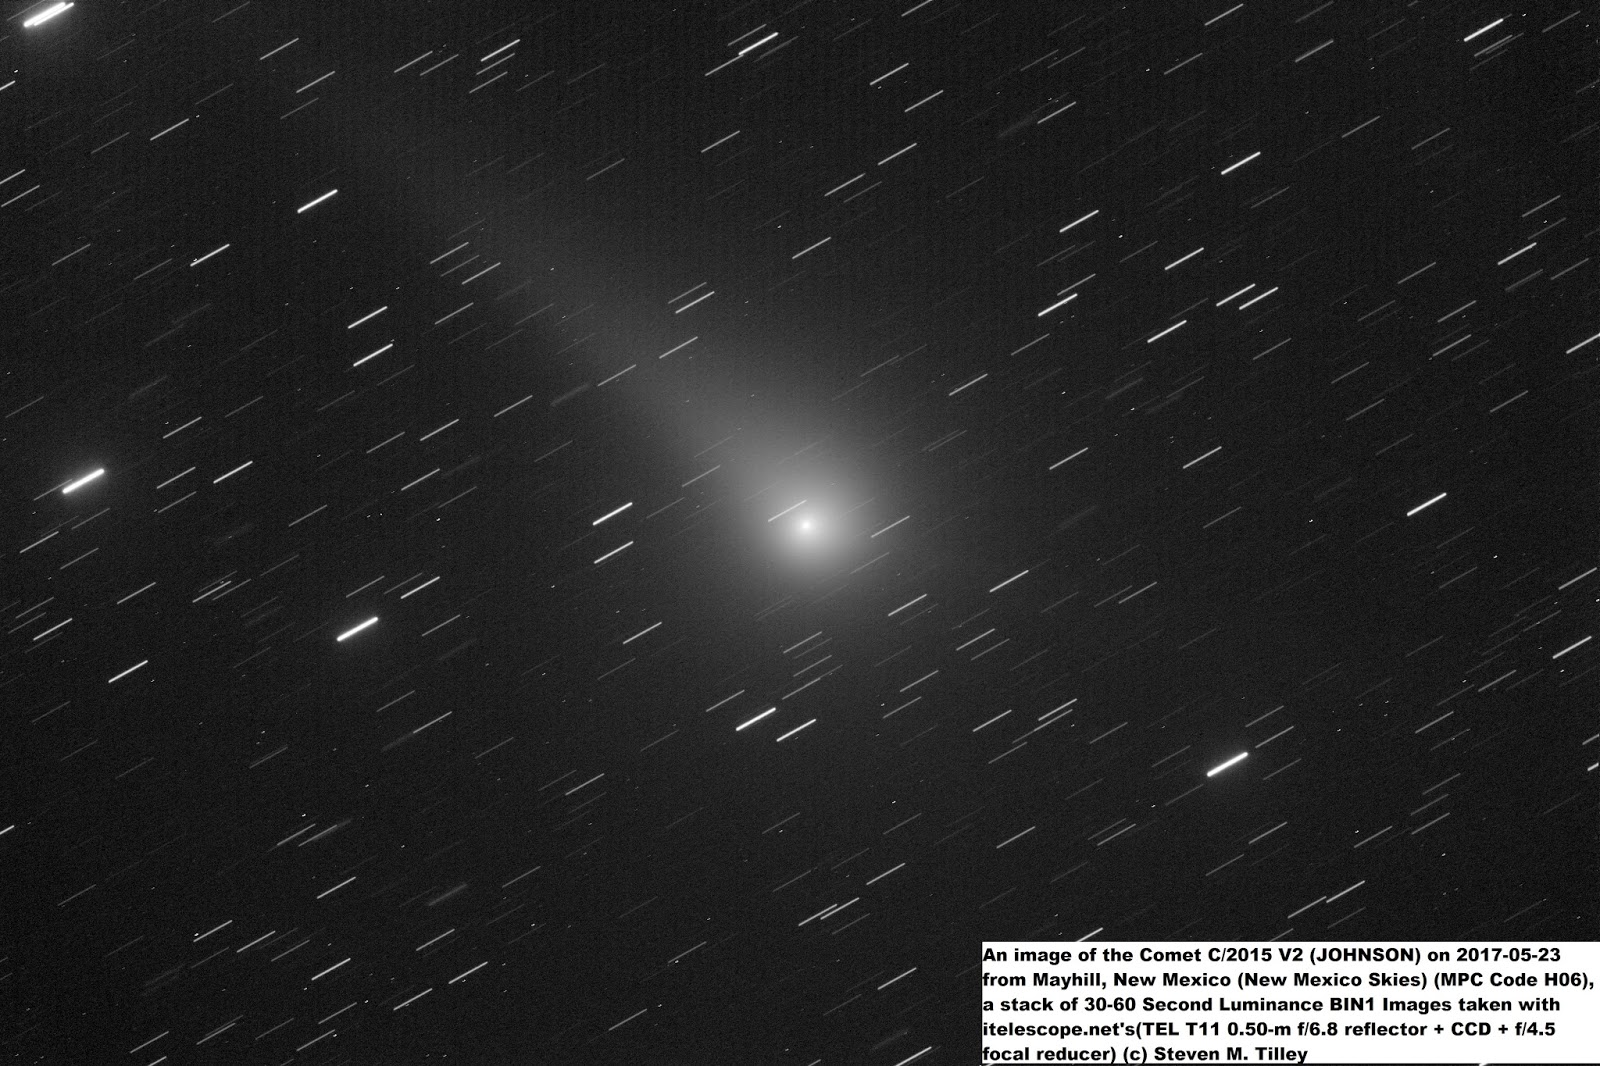 Lagniappe Observing: Comet C/2015 V2 (JOHNSON) Look at You NOW.....